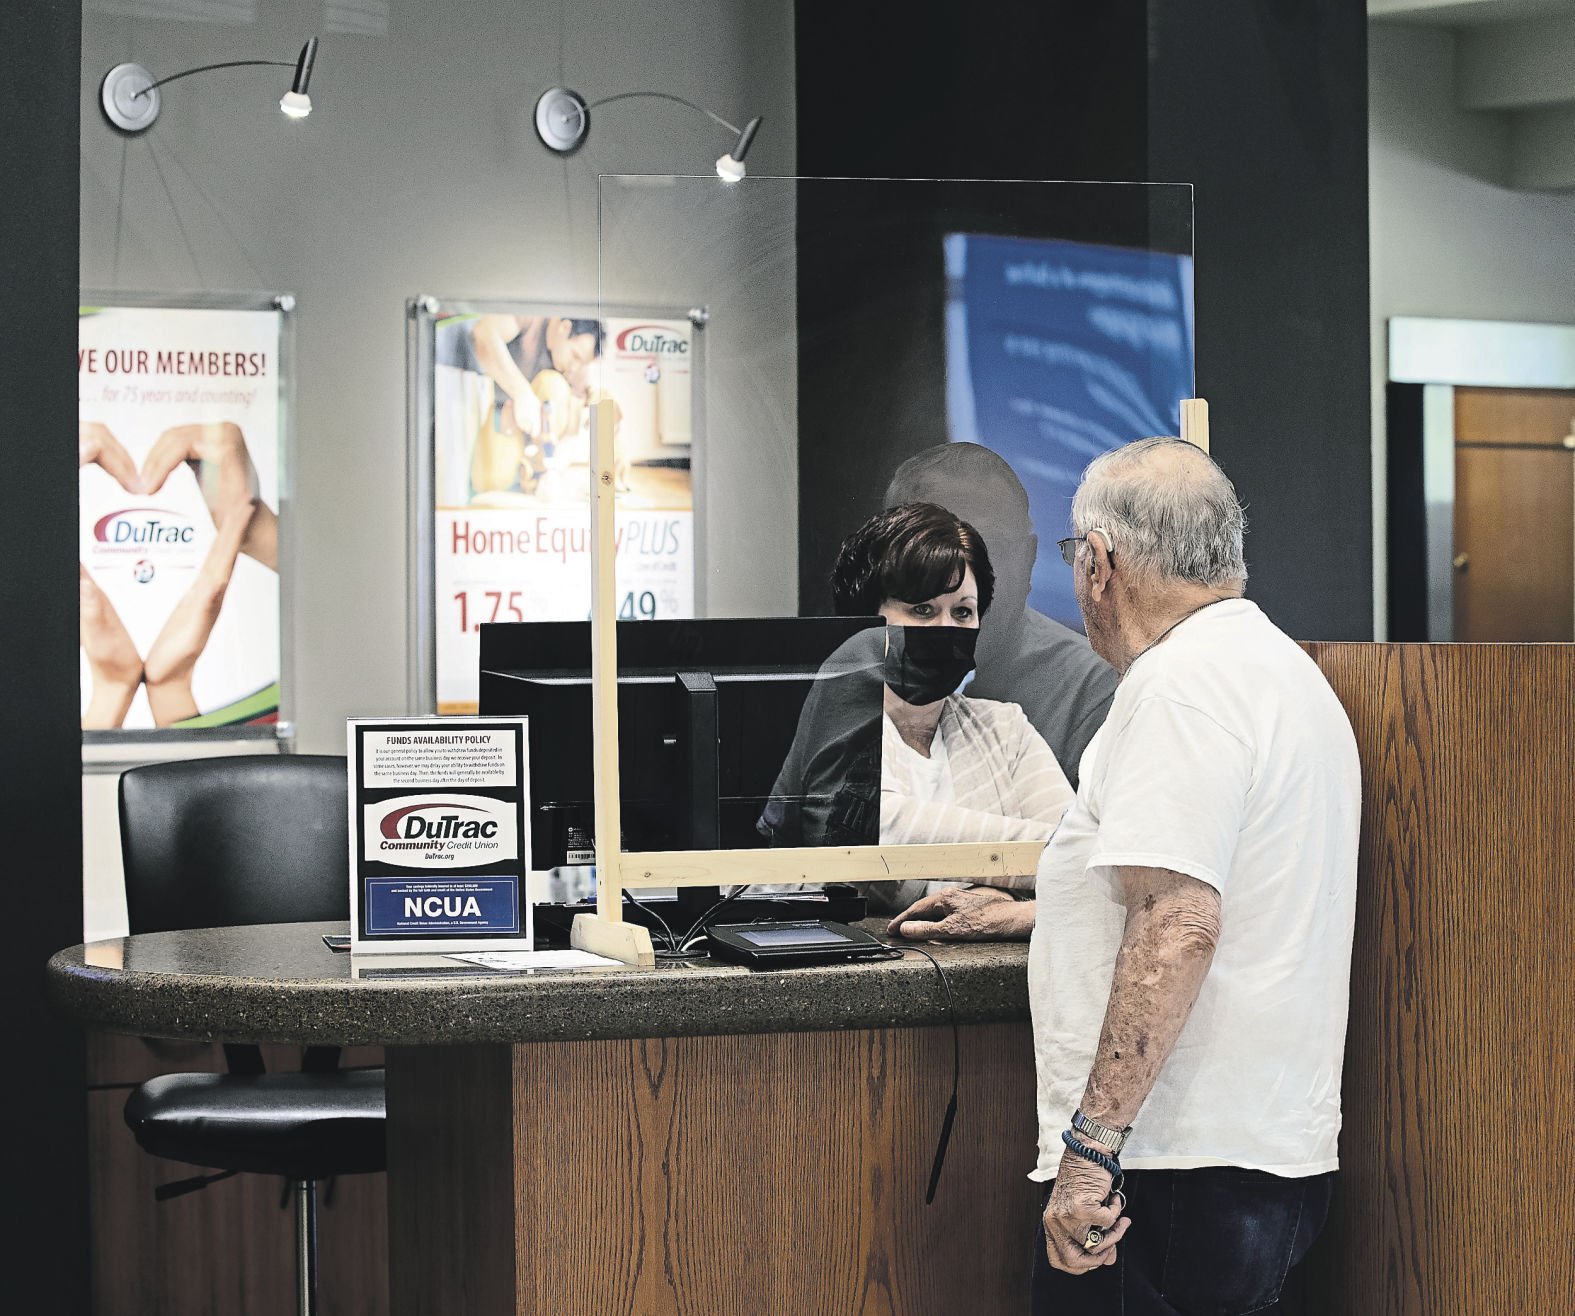 Customer Ron Holdridge talks with teller Melissa Steuer at the main DuTrac Community Credit Union branch on Asbury Road in Dubuque. The institution began in an office at the John Deere Dubuque Works plant. Today, it serves members in numerous counties.    PHOTO CREDIT: Stephen Gassman